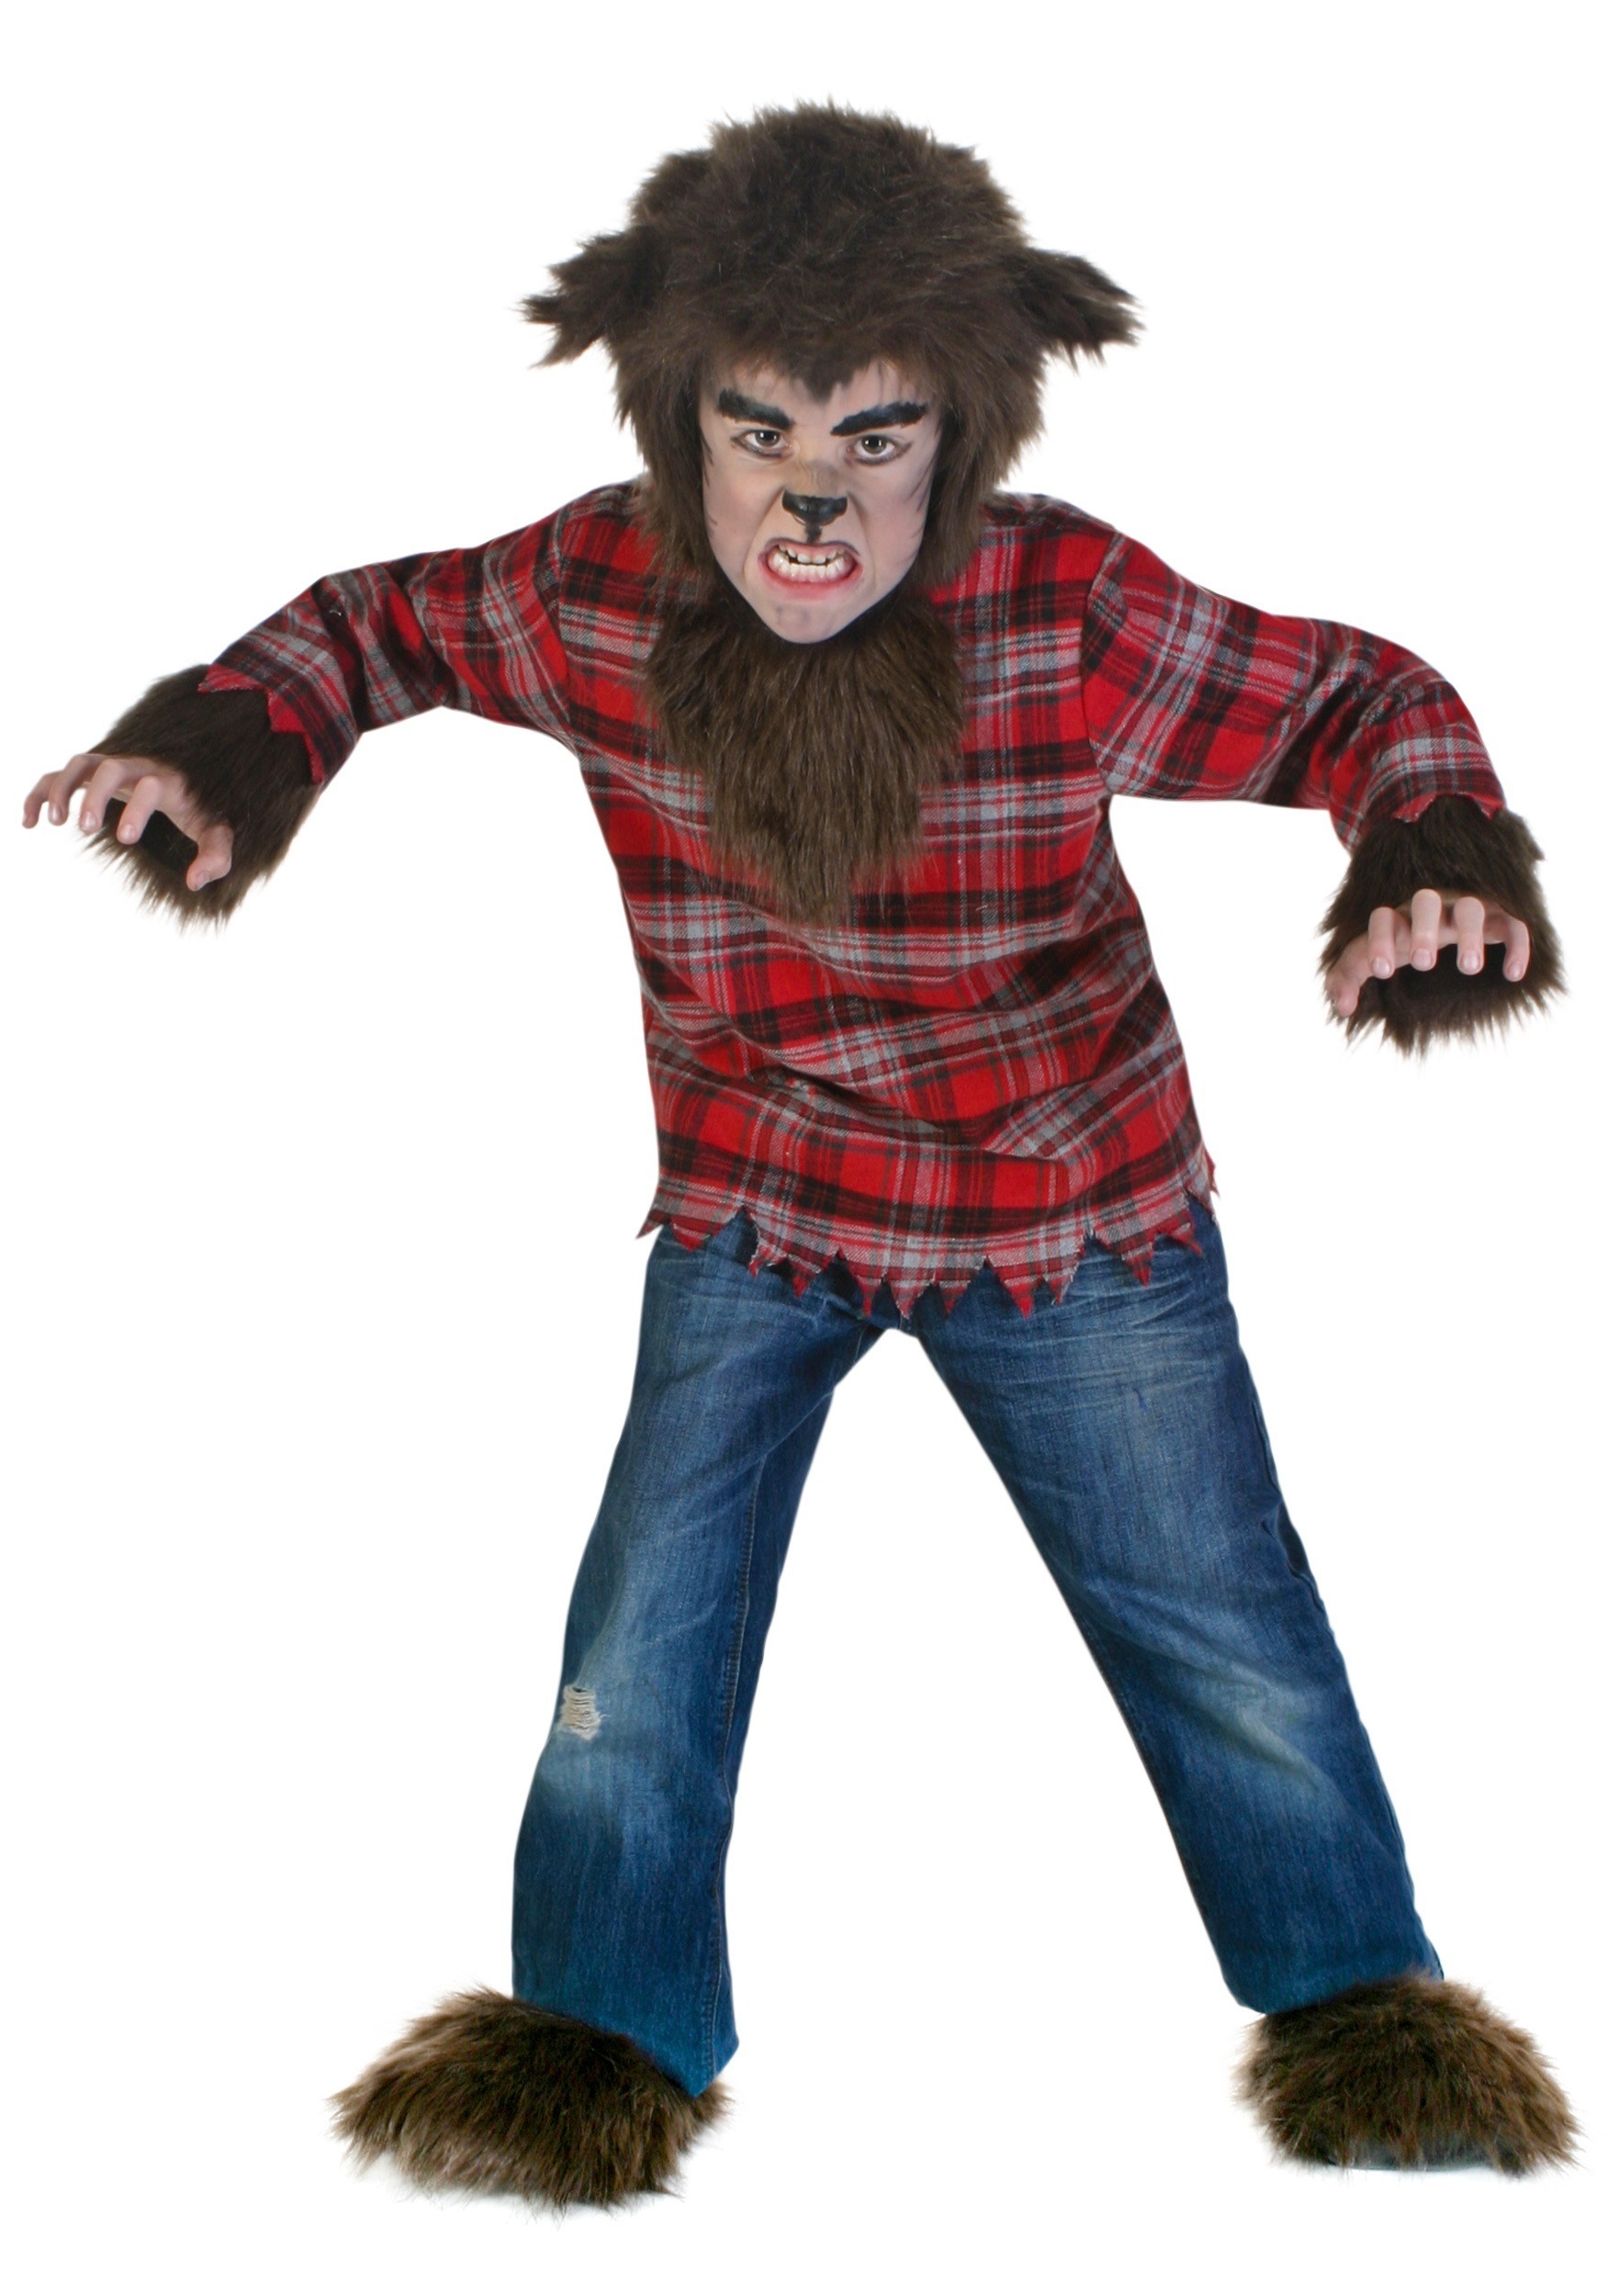 Photos - Fancy Dress FUN Costumes Kid's Fierce Werewolf Costume | Exclusive | Made By Us Brown&